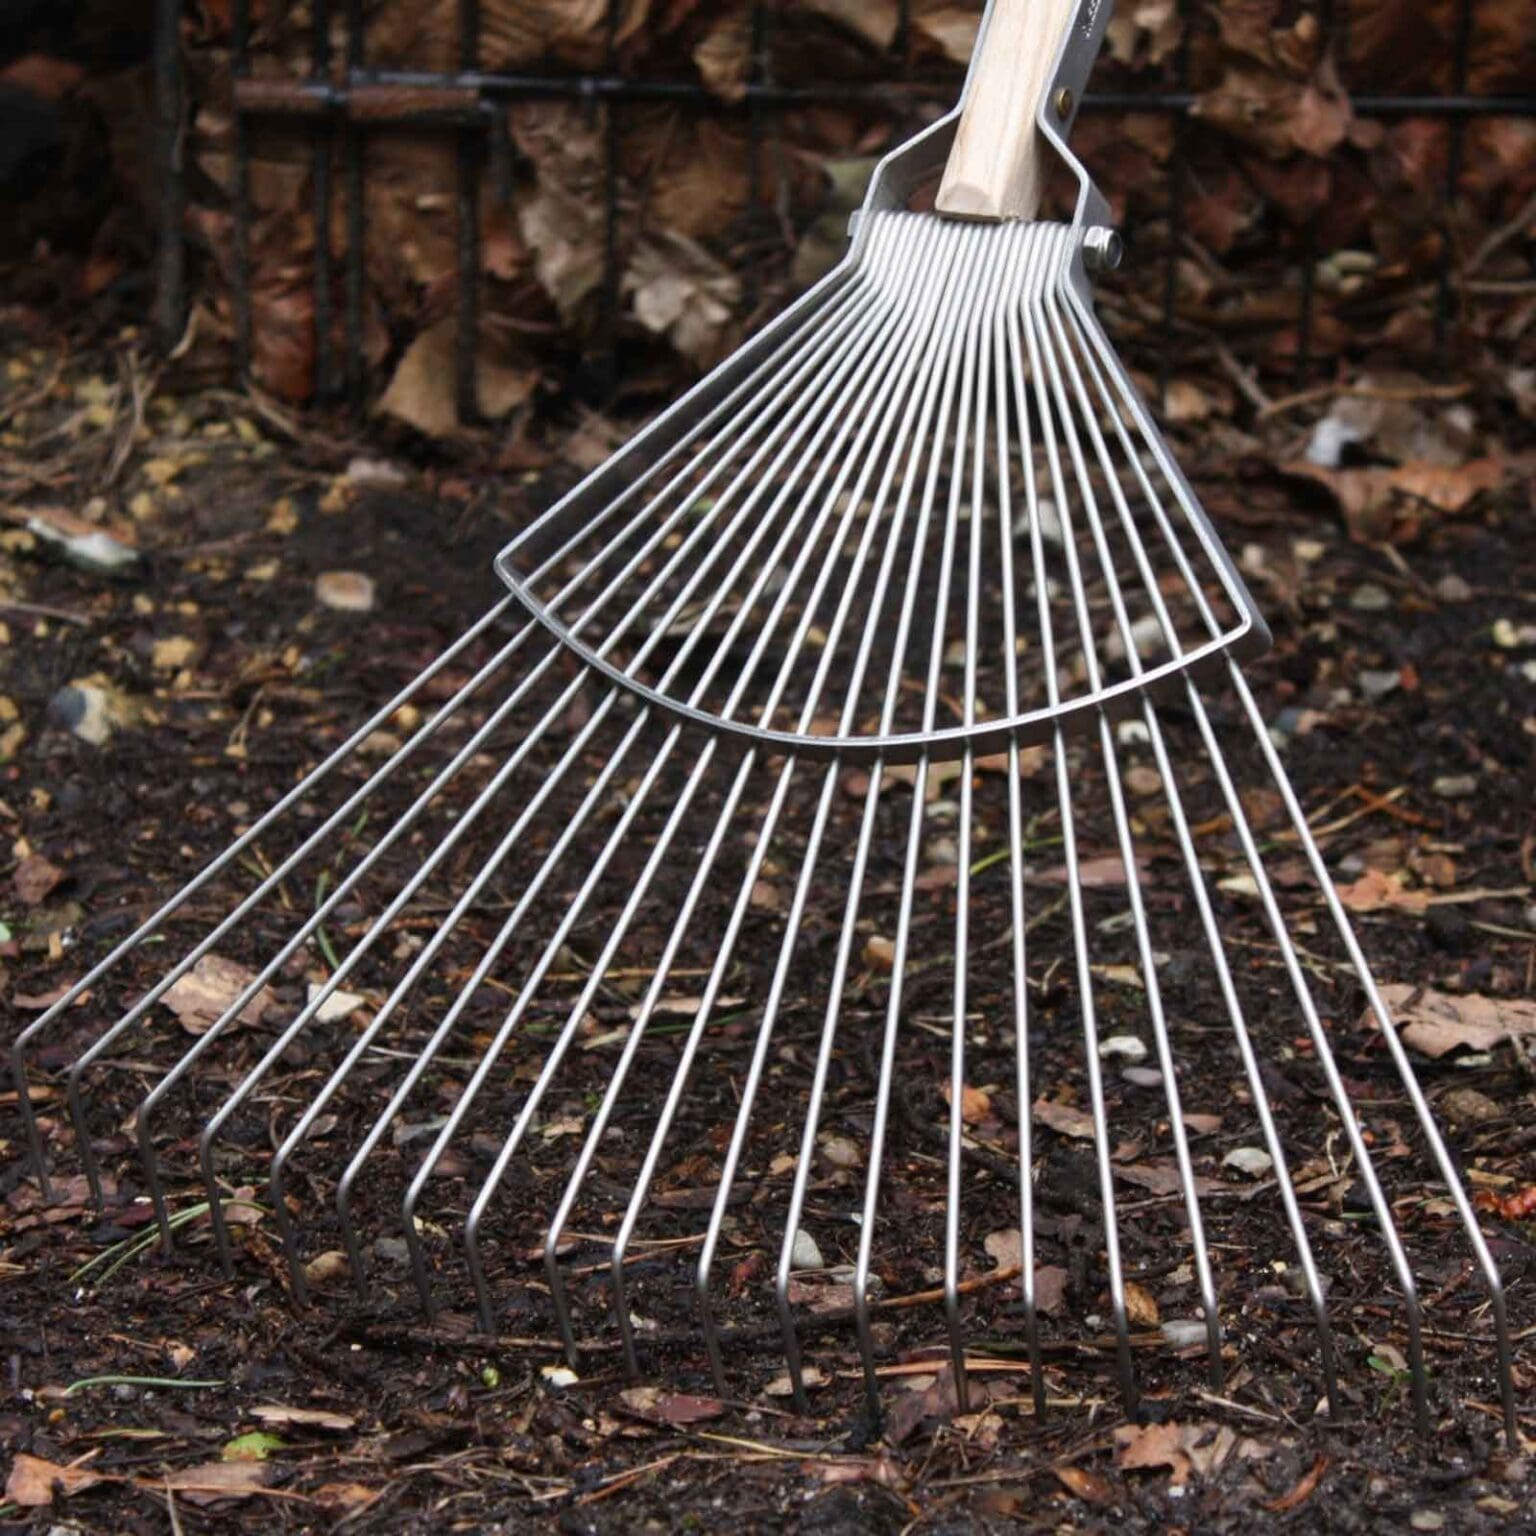 Choosing The Right Rake And Raking Tips | Dr. Green Lawn Care Services